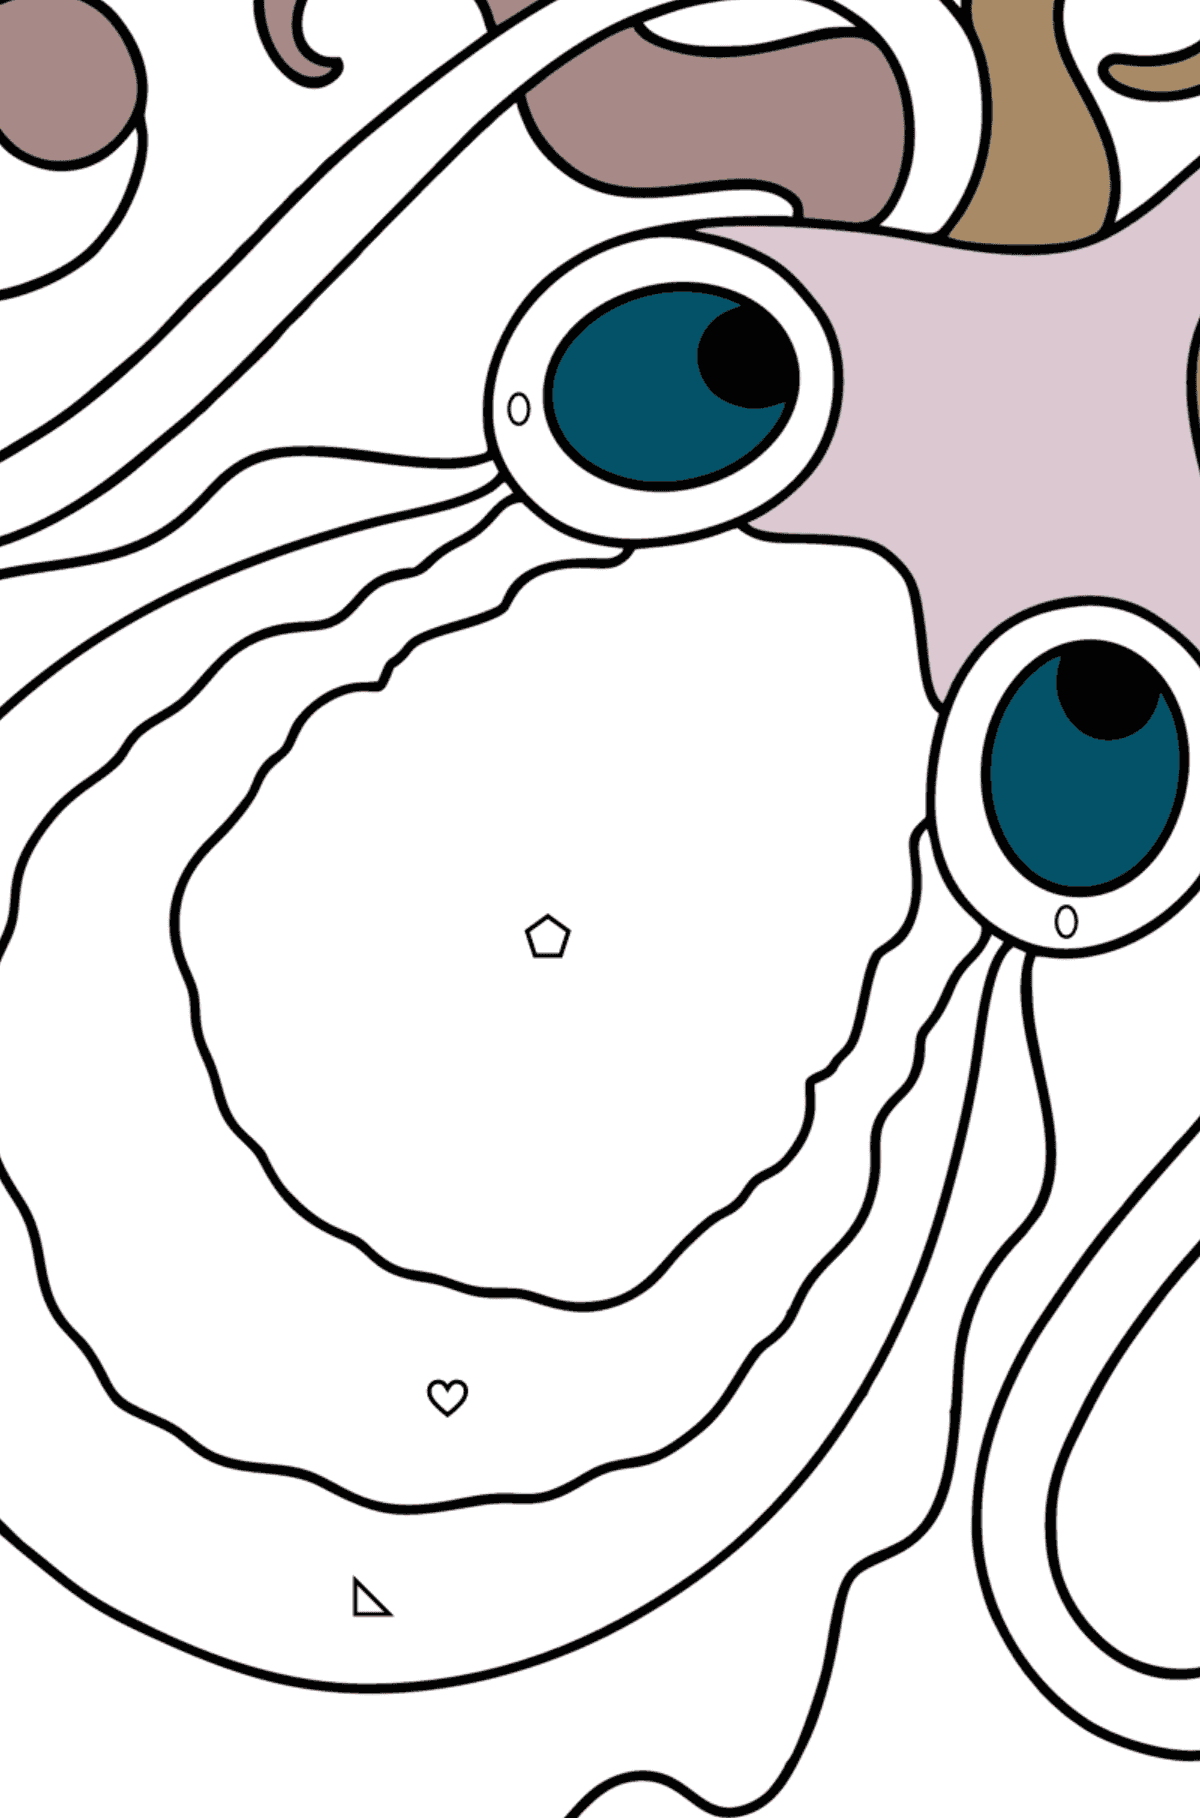 Cuttlefish coloring page - Coloring by Geometric Shapes for Kids